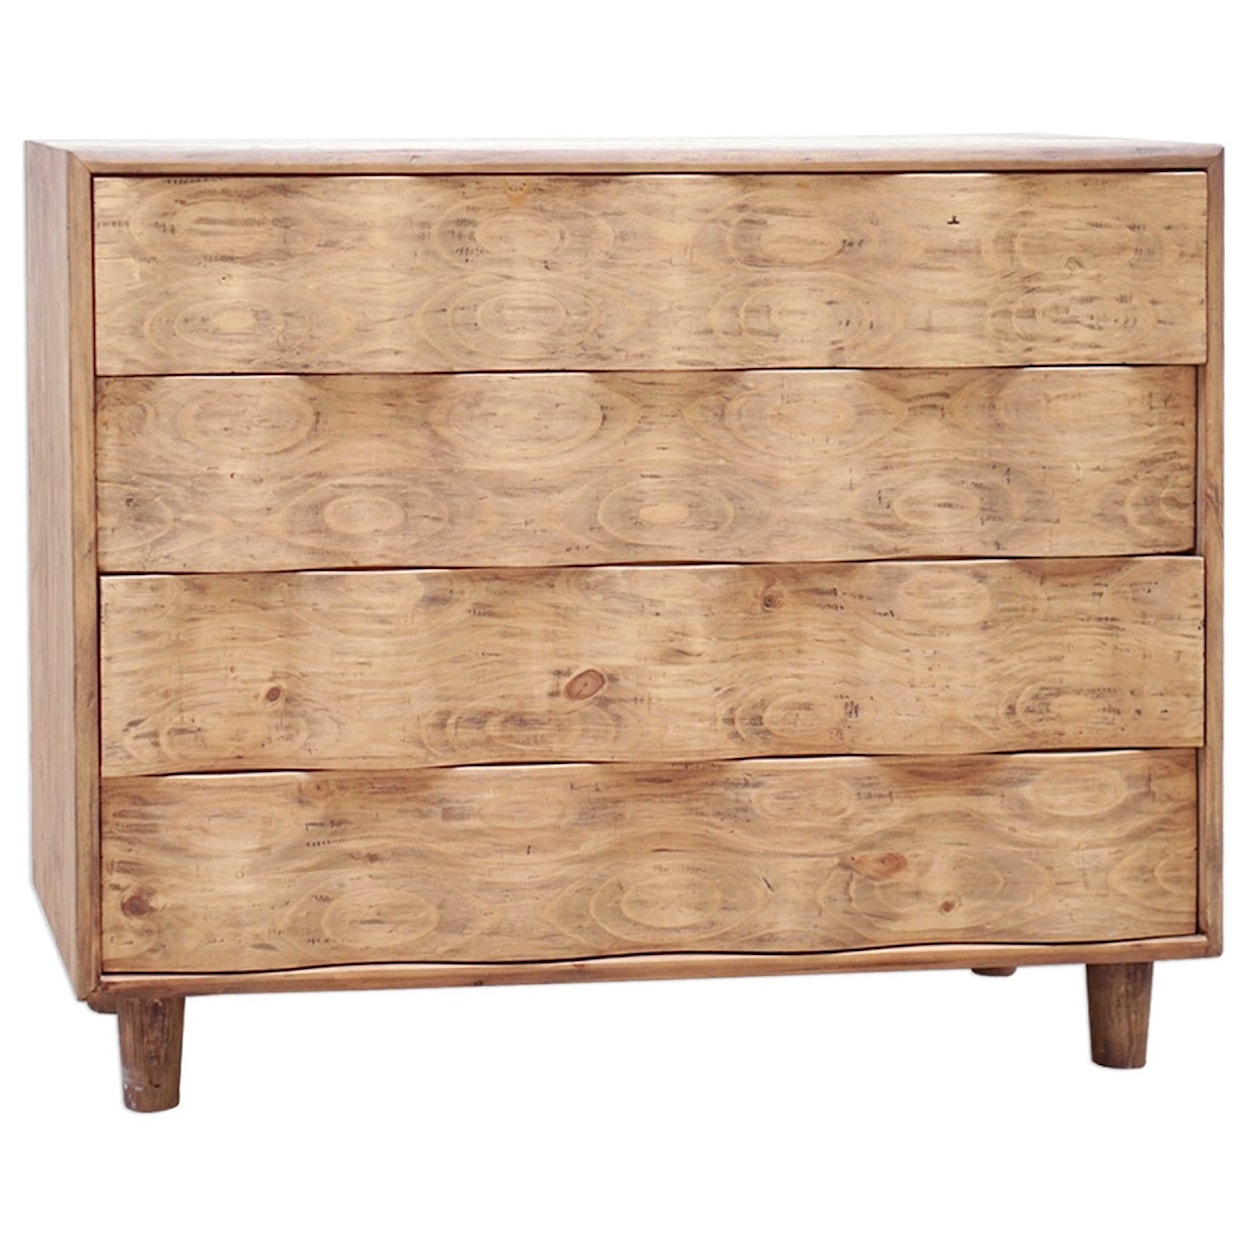 Uttermost Accent Furniture - Chests Crawford Light Oak Accent Chest